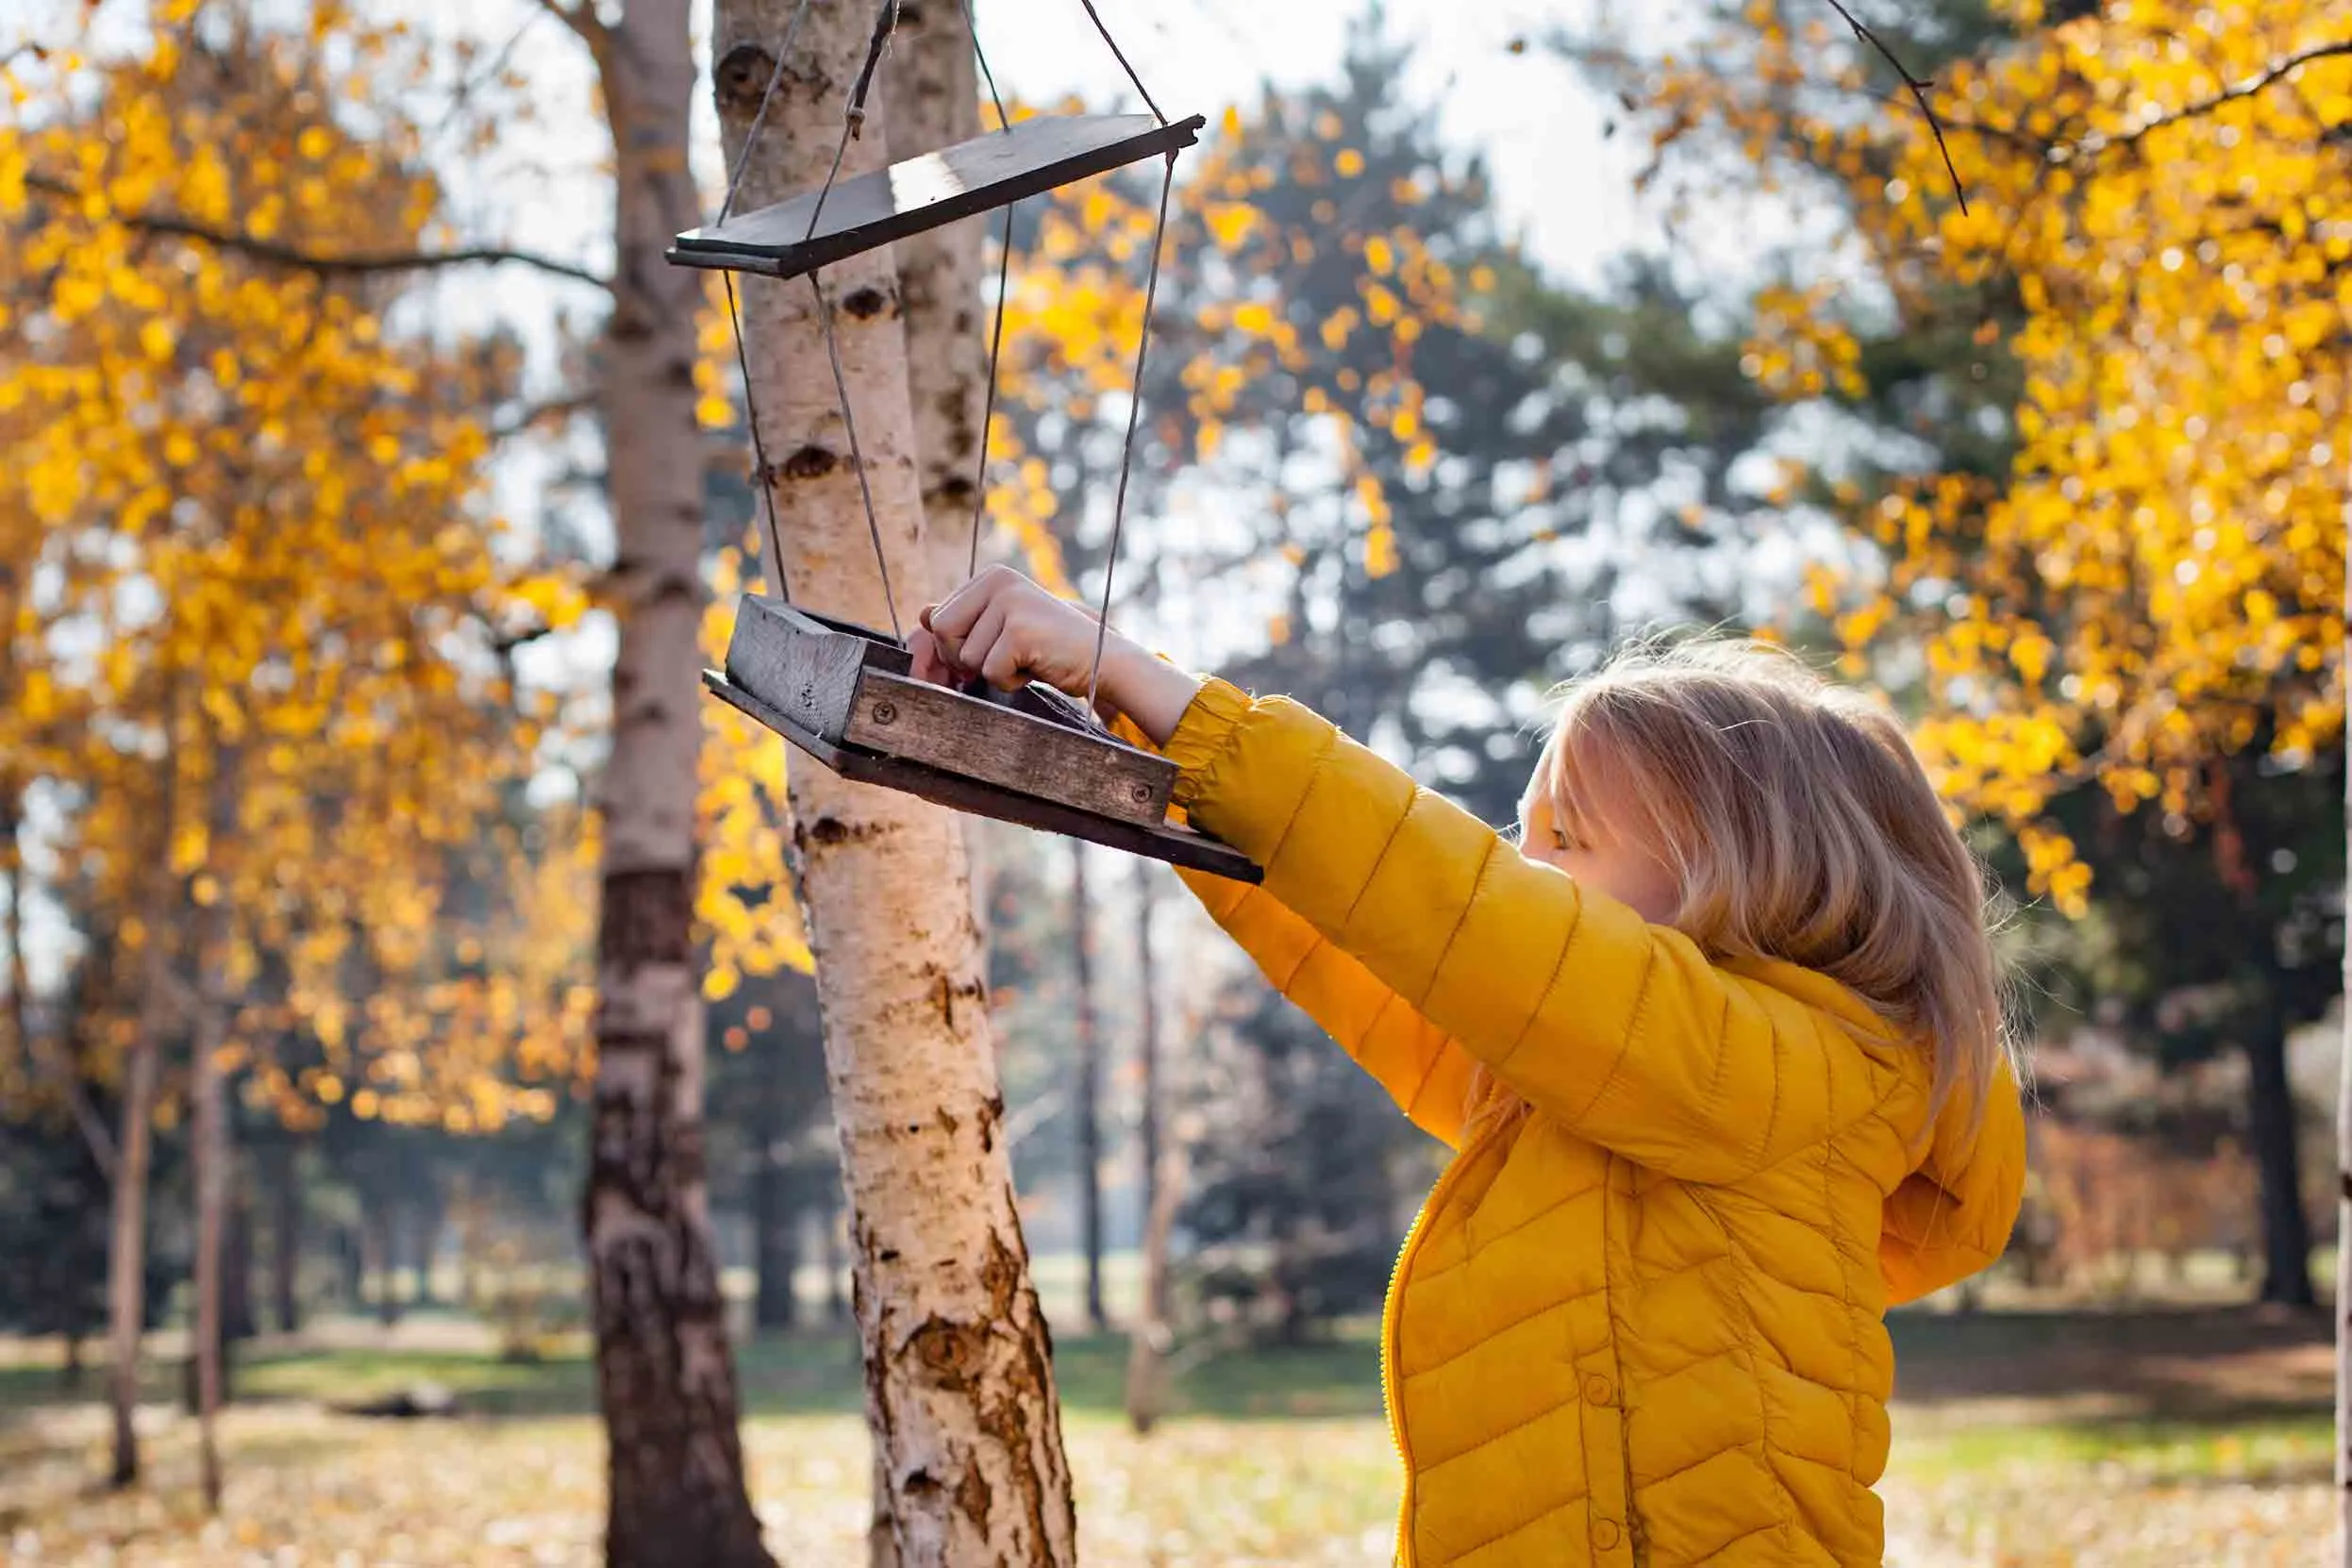 A child in a yellow coat reaching into a hanging bird feeding table, to place seed into the tray.